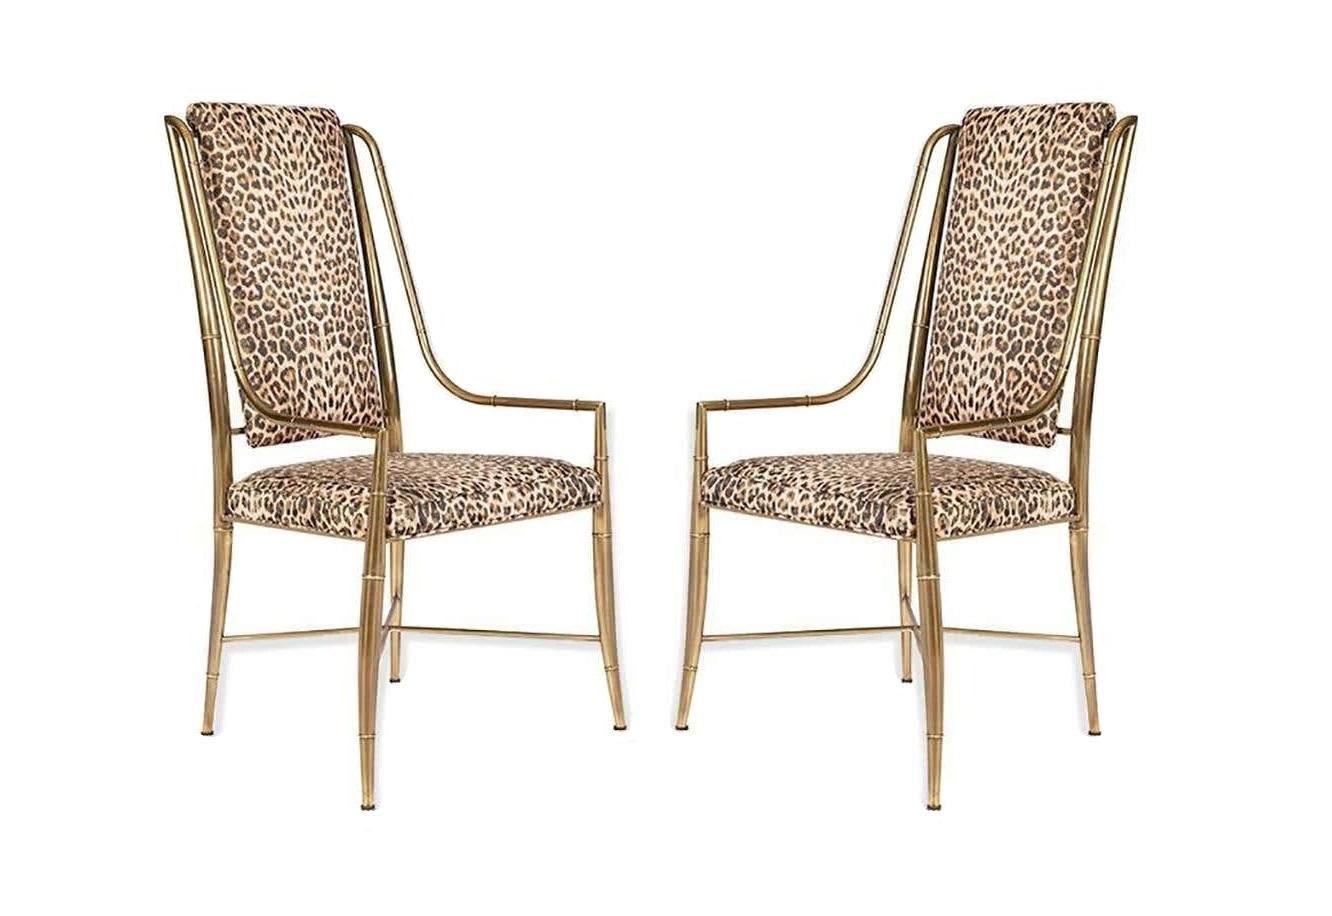 Gorgeous set of four solid brass faux bamboo dining chairs by Weiman/Warren Lloyd, Italy, circa 1975. The 